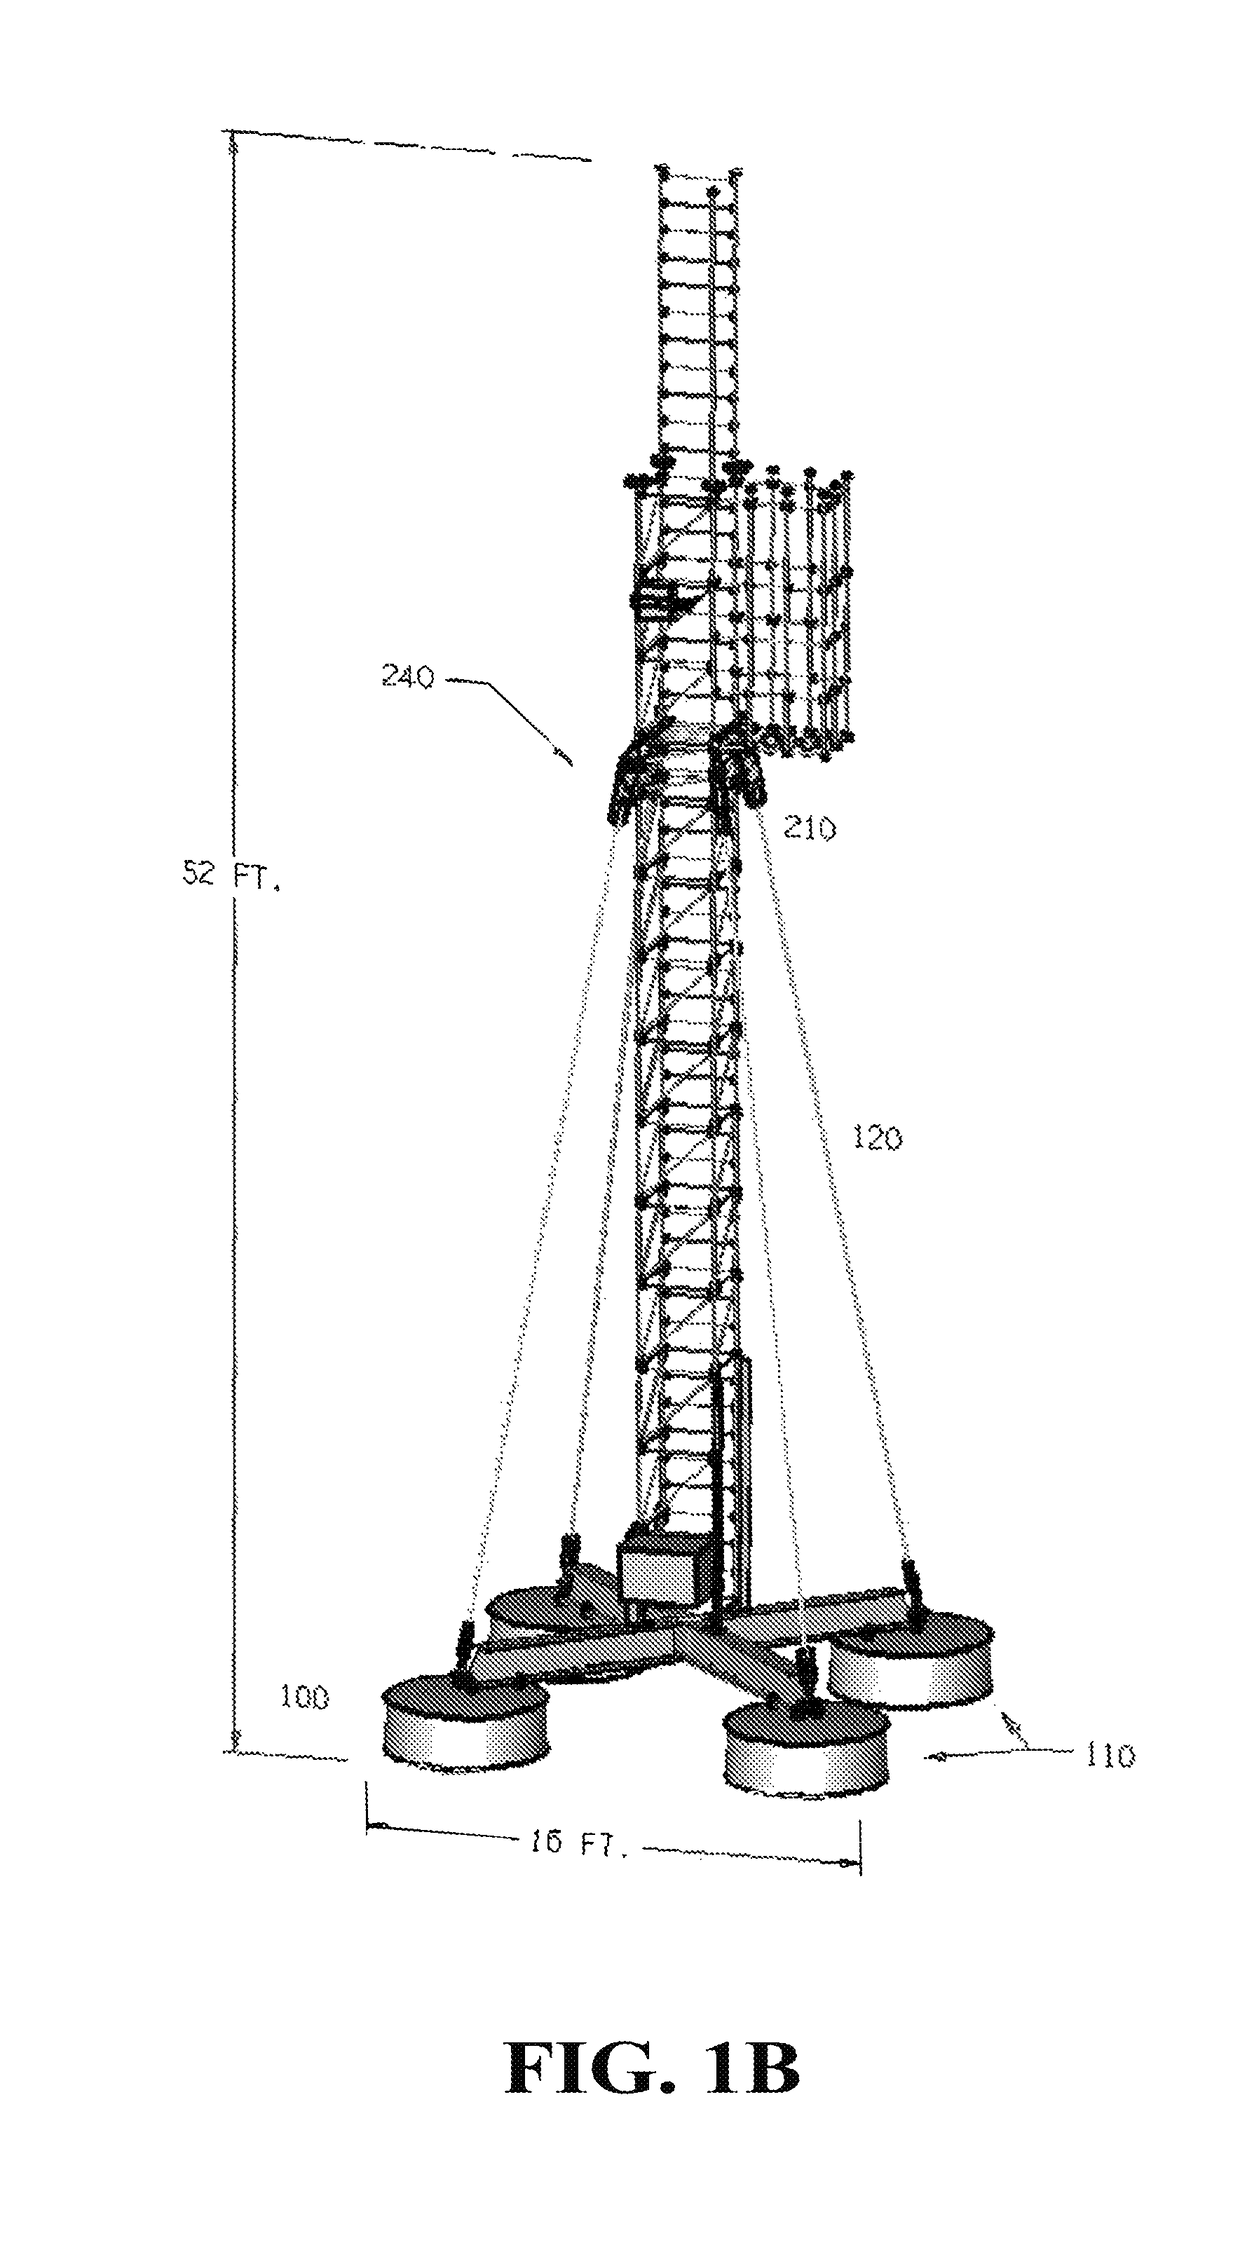 Systems and methods for self-standing, self-supporting, rapid-deployment, movable communications towers